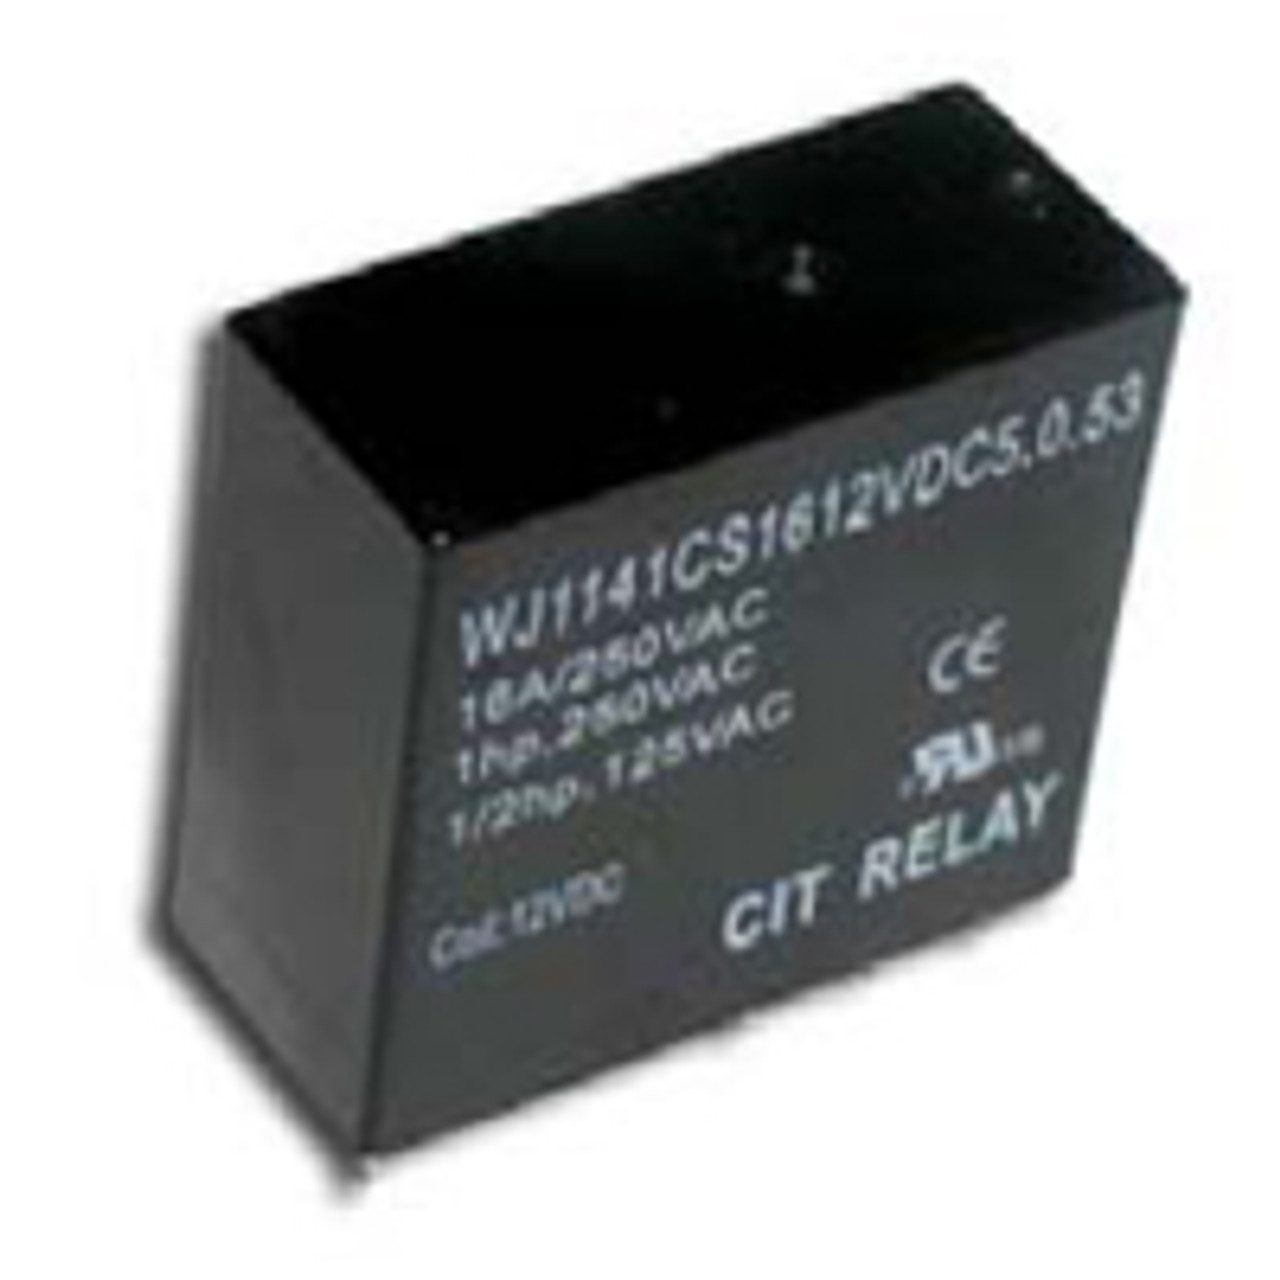 CIT Relay and Switch J1141AS106VDC3.5.53 Power Relays